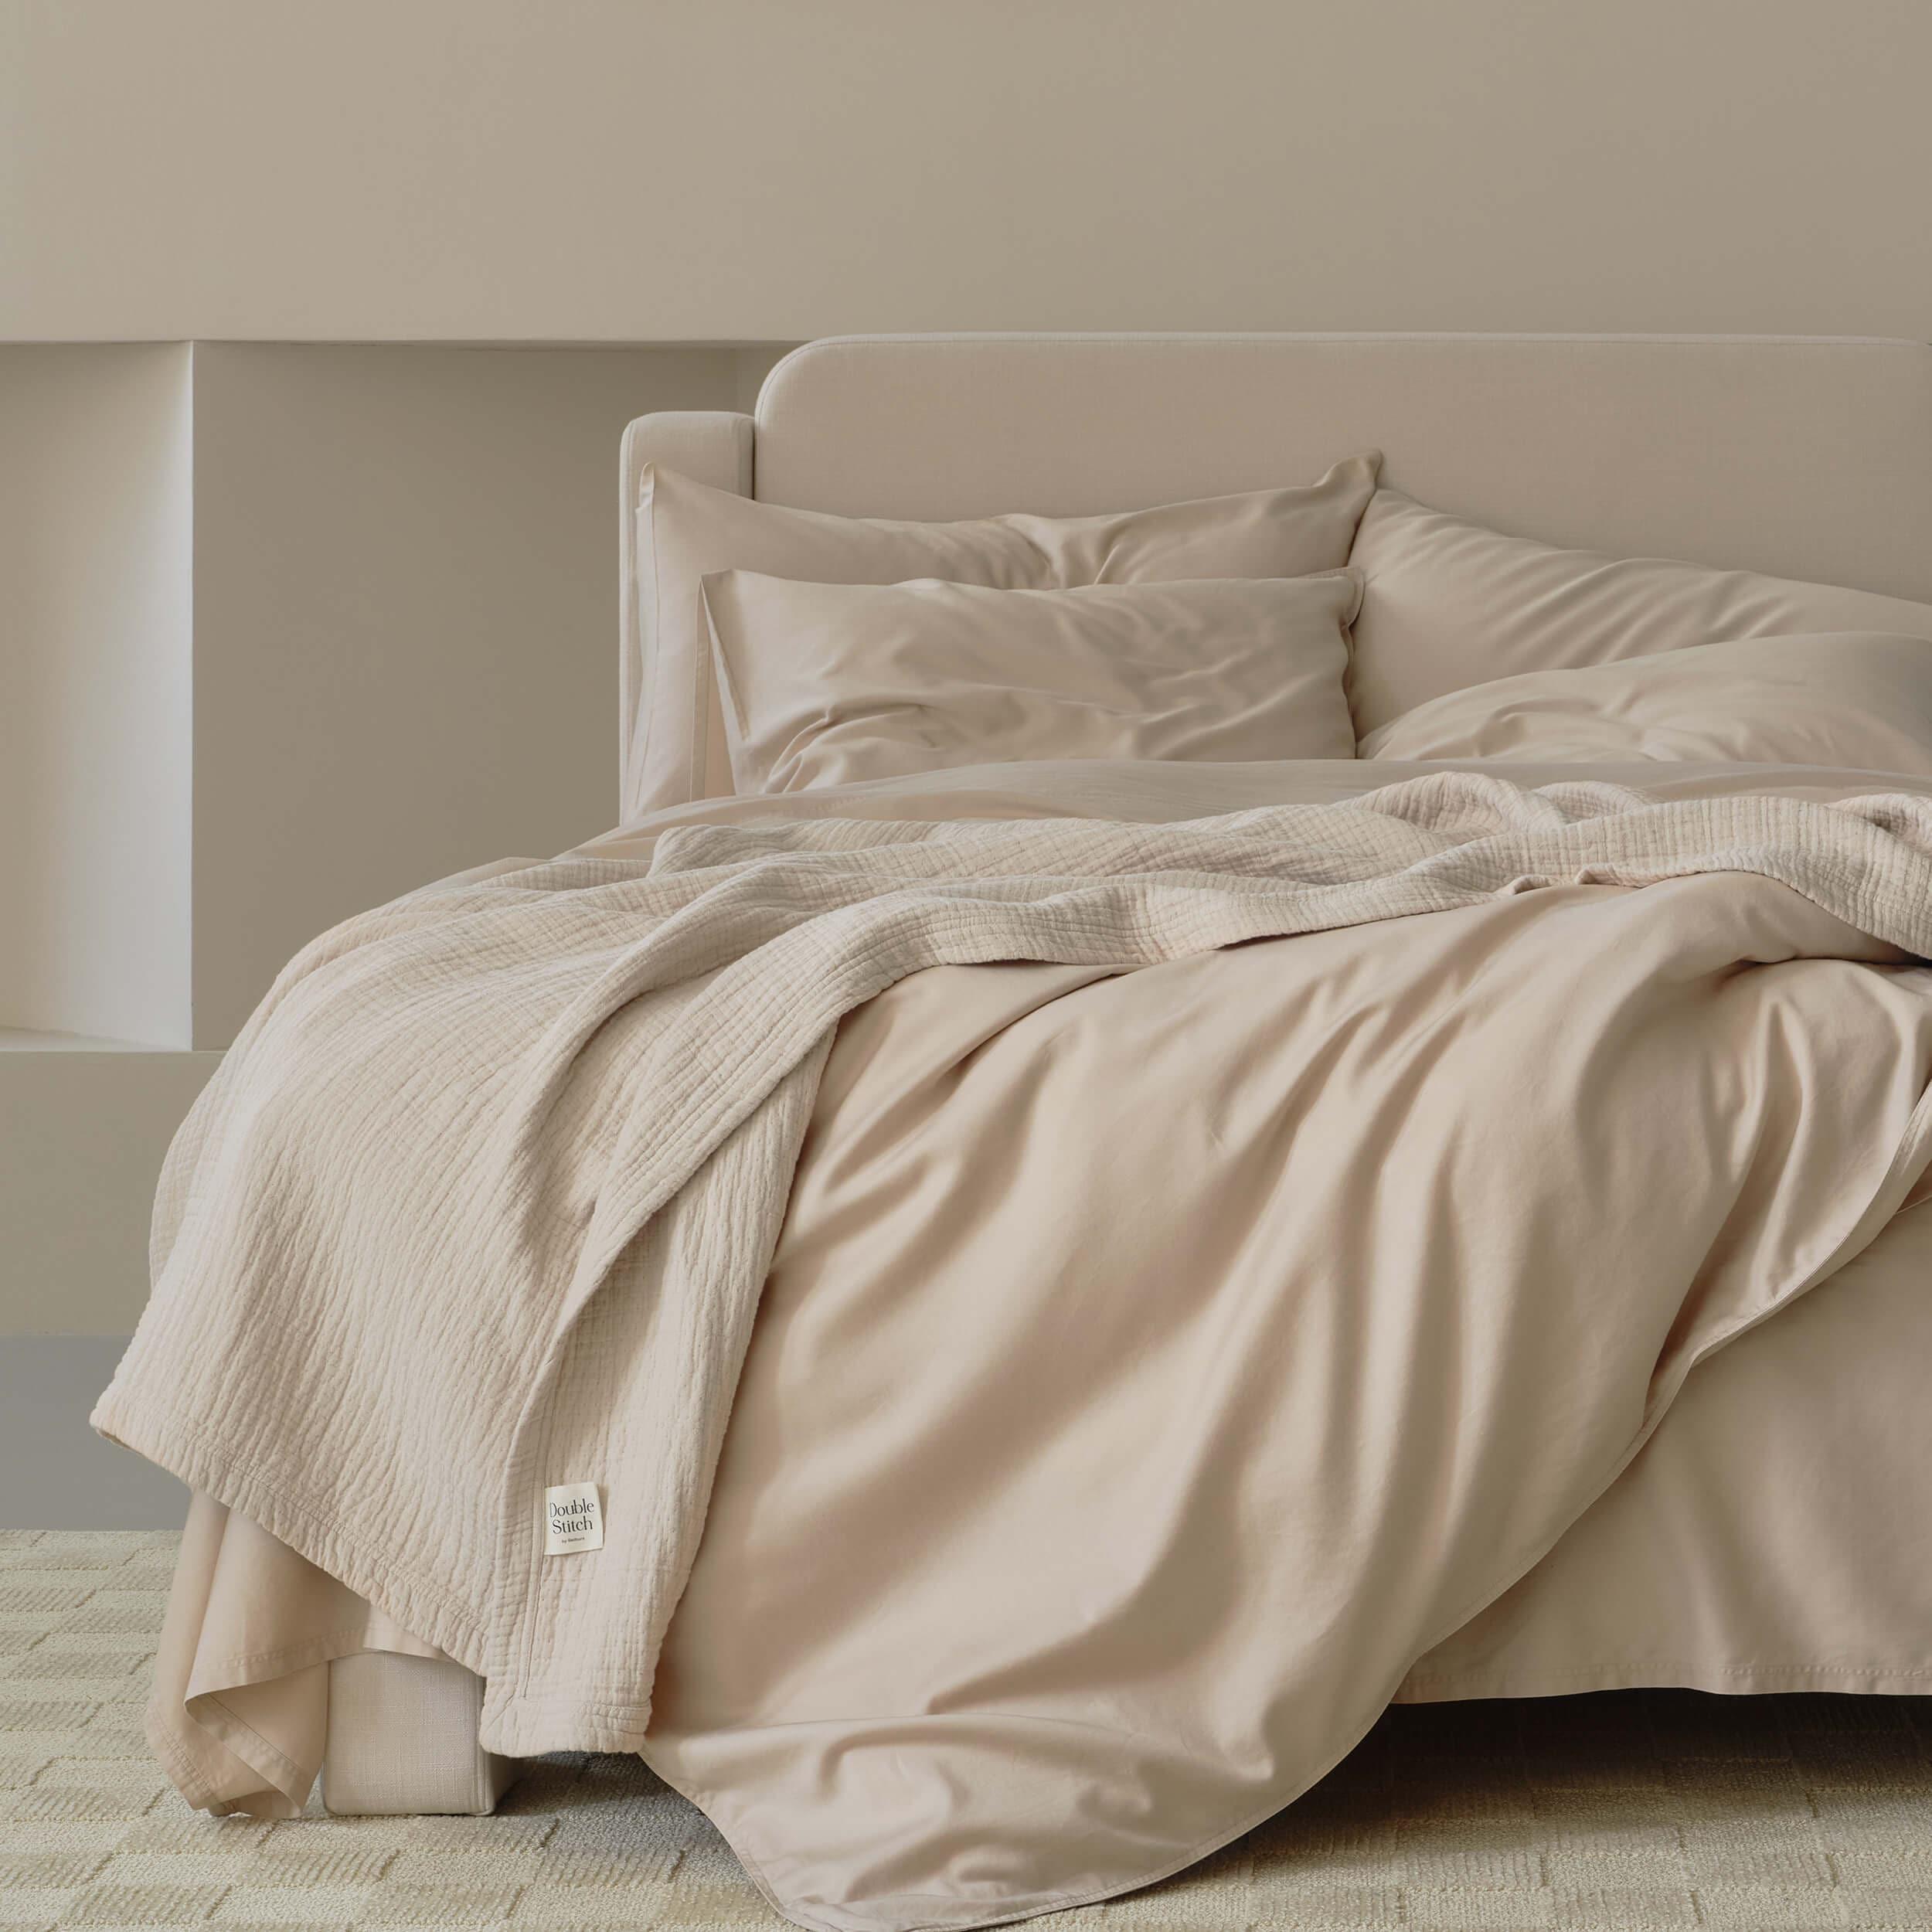 Transform your bedroom into a serene oasis with our duvet cover set queen in soothing colors.